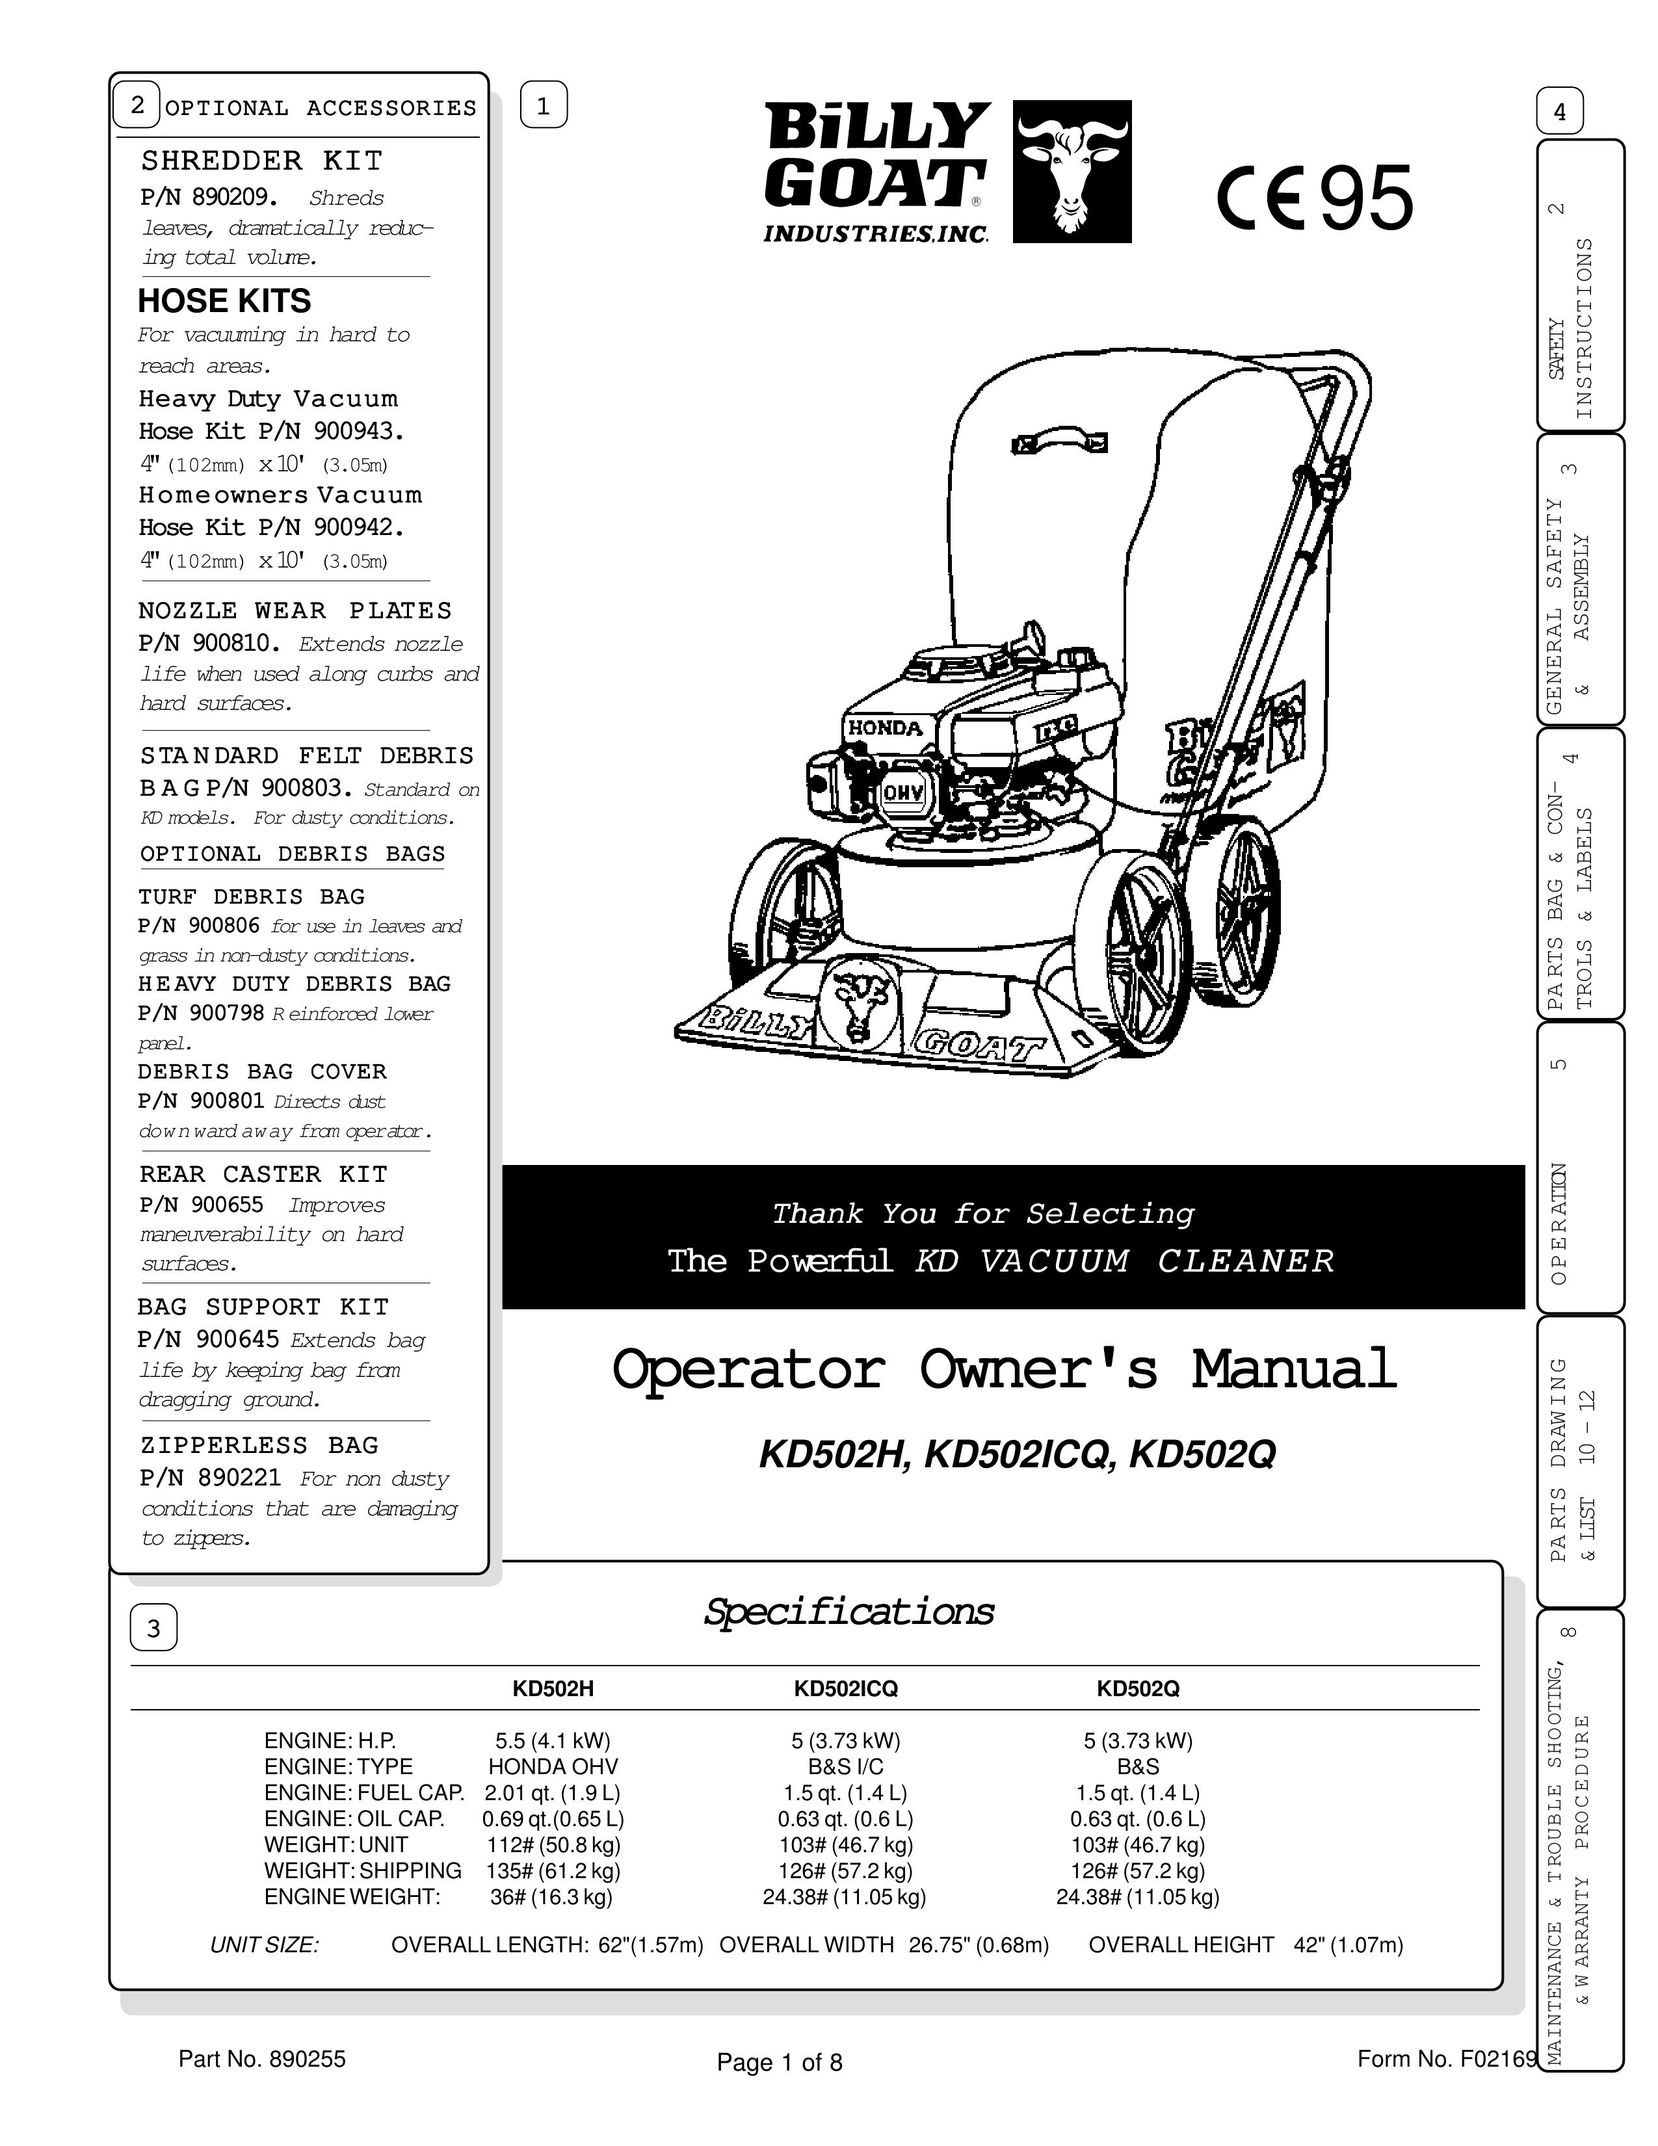 Billy Goat KD502H Vacuum Cleaner User Manual (Page 1)